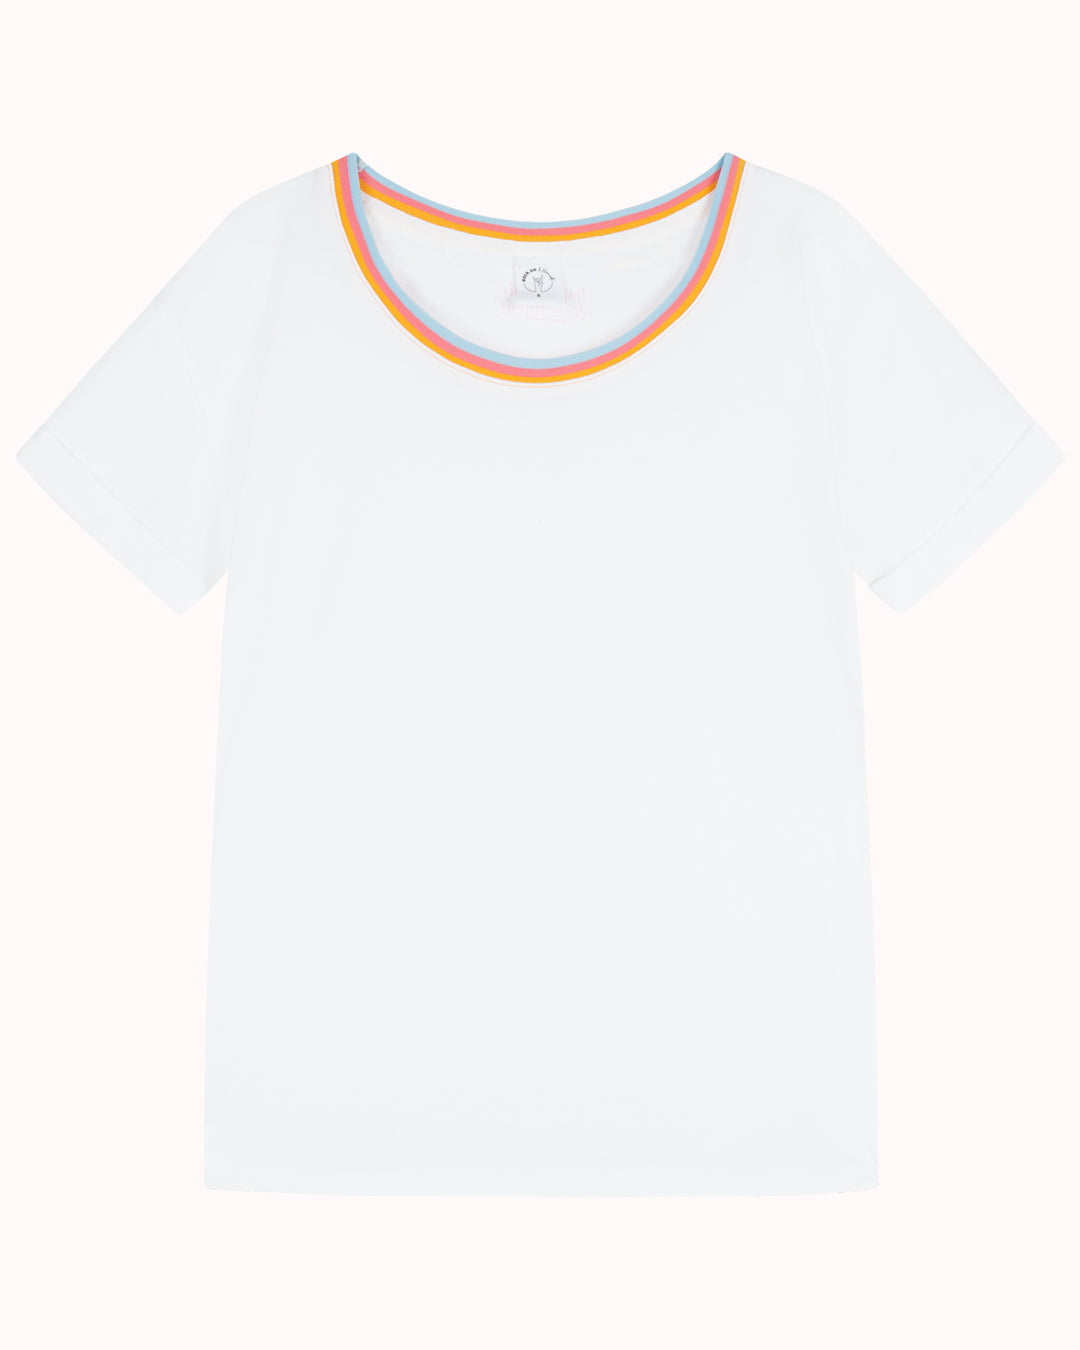 Happy Holy & Confident T-Shirt (off white)